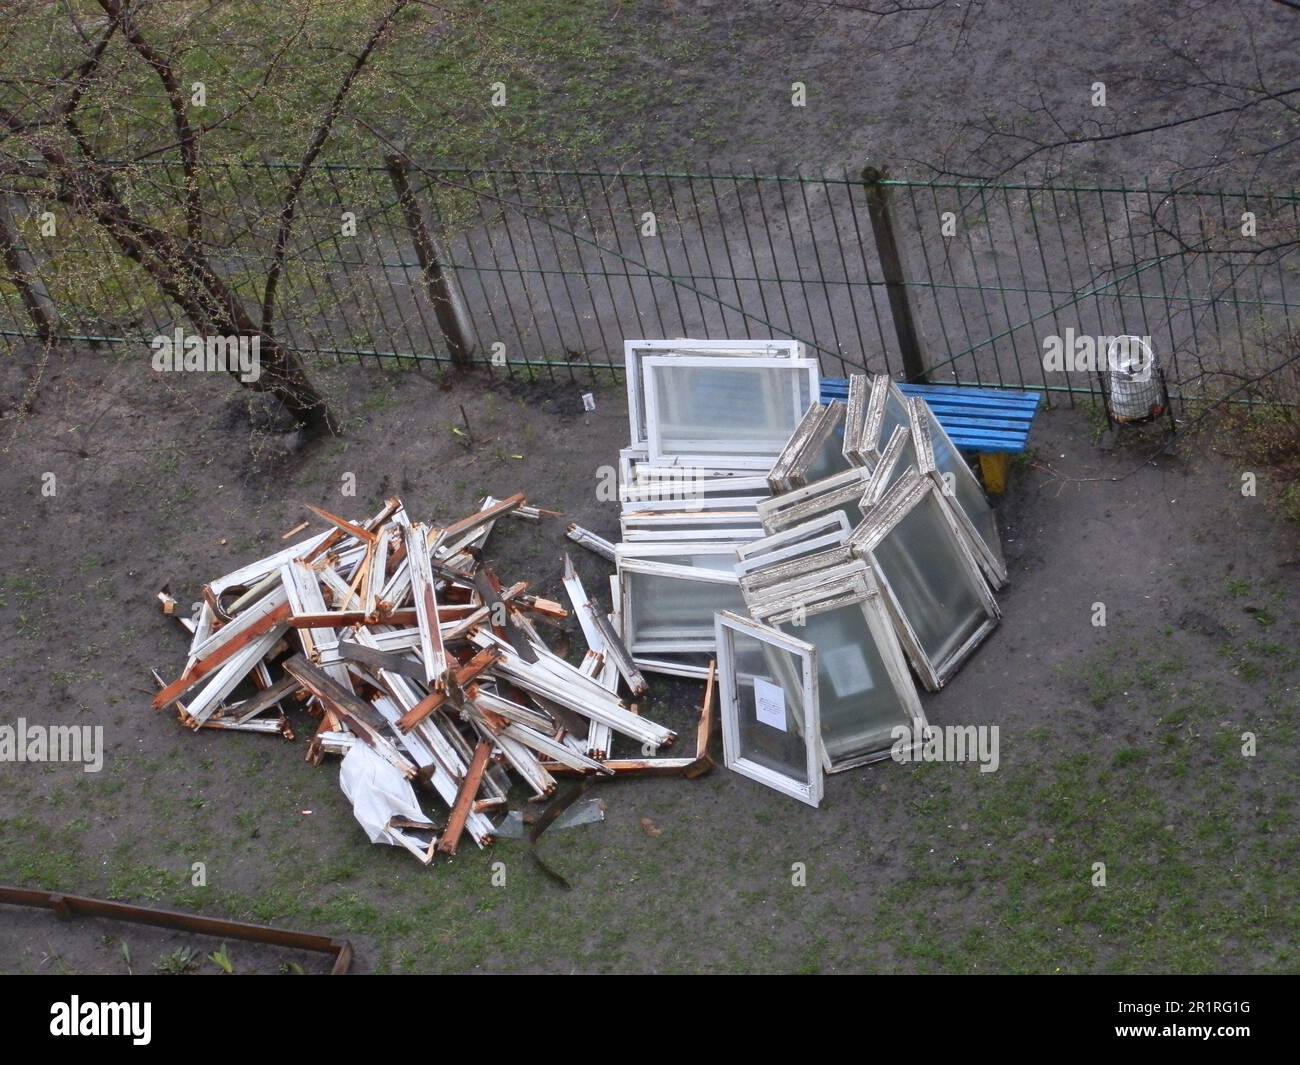 Construction debris from the dismantling of old windows in the courtyard of a the house. Stock Photo